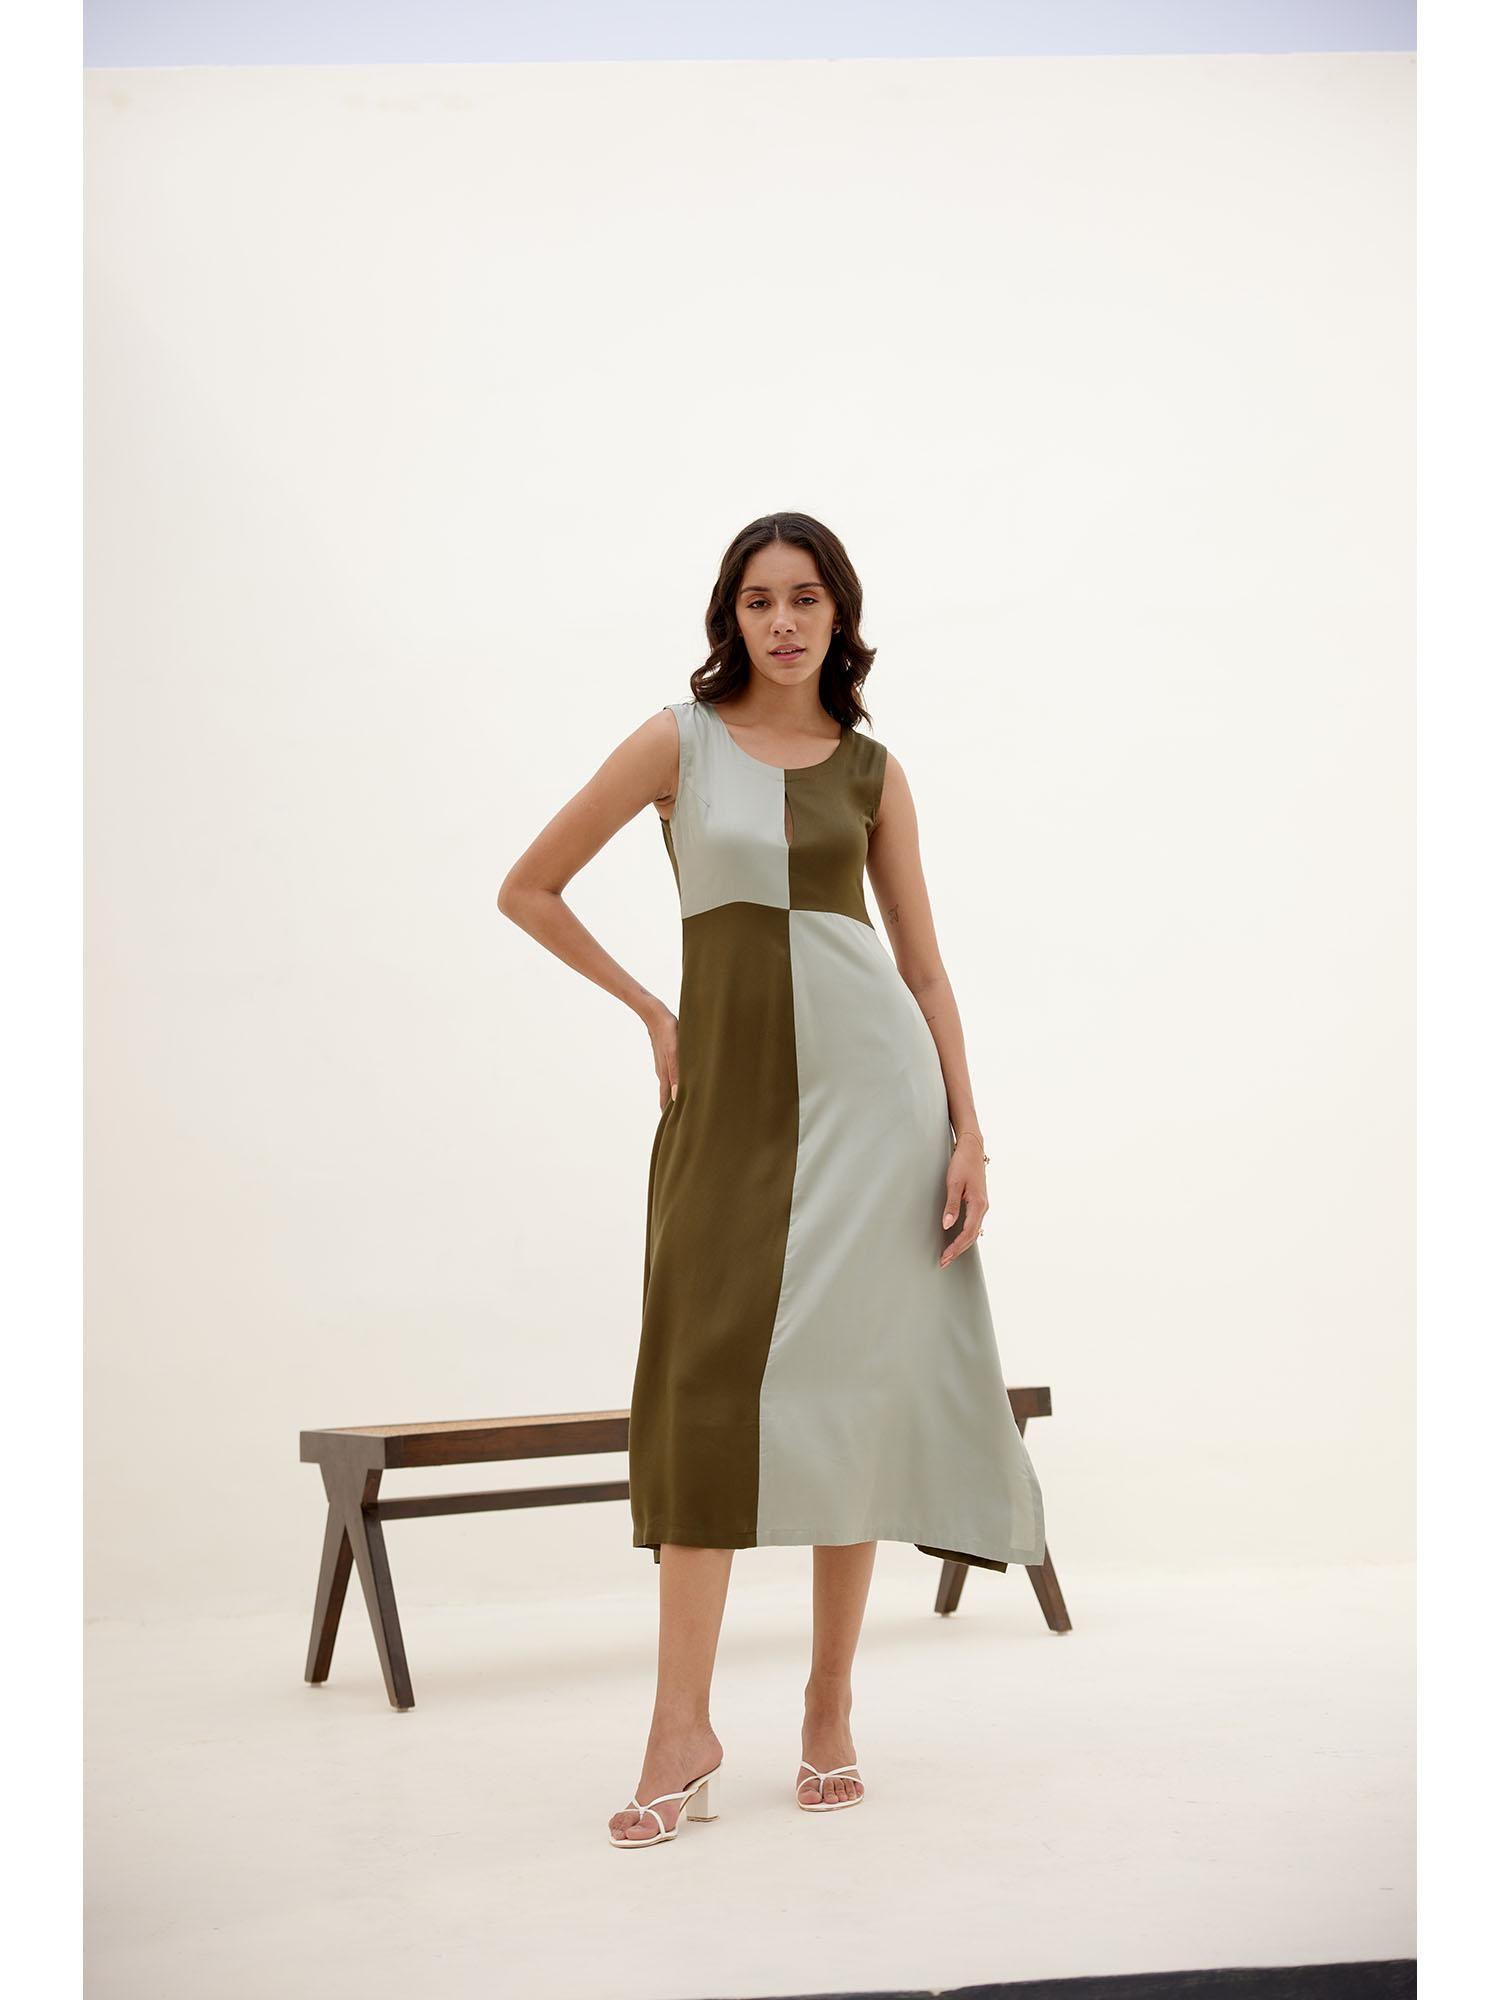 clover olive and grey colorblock dress